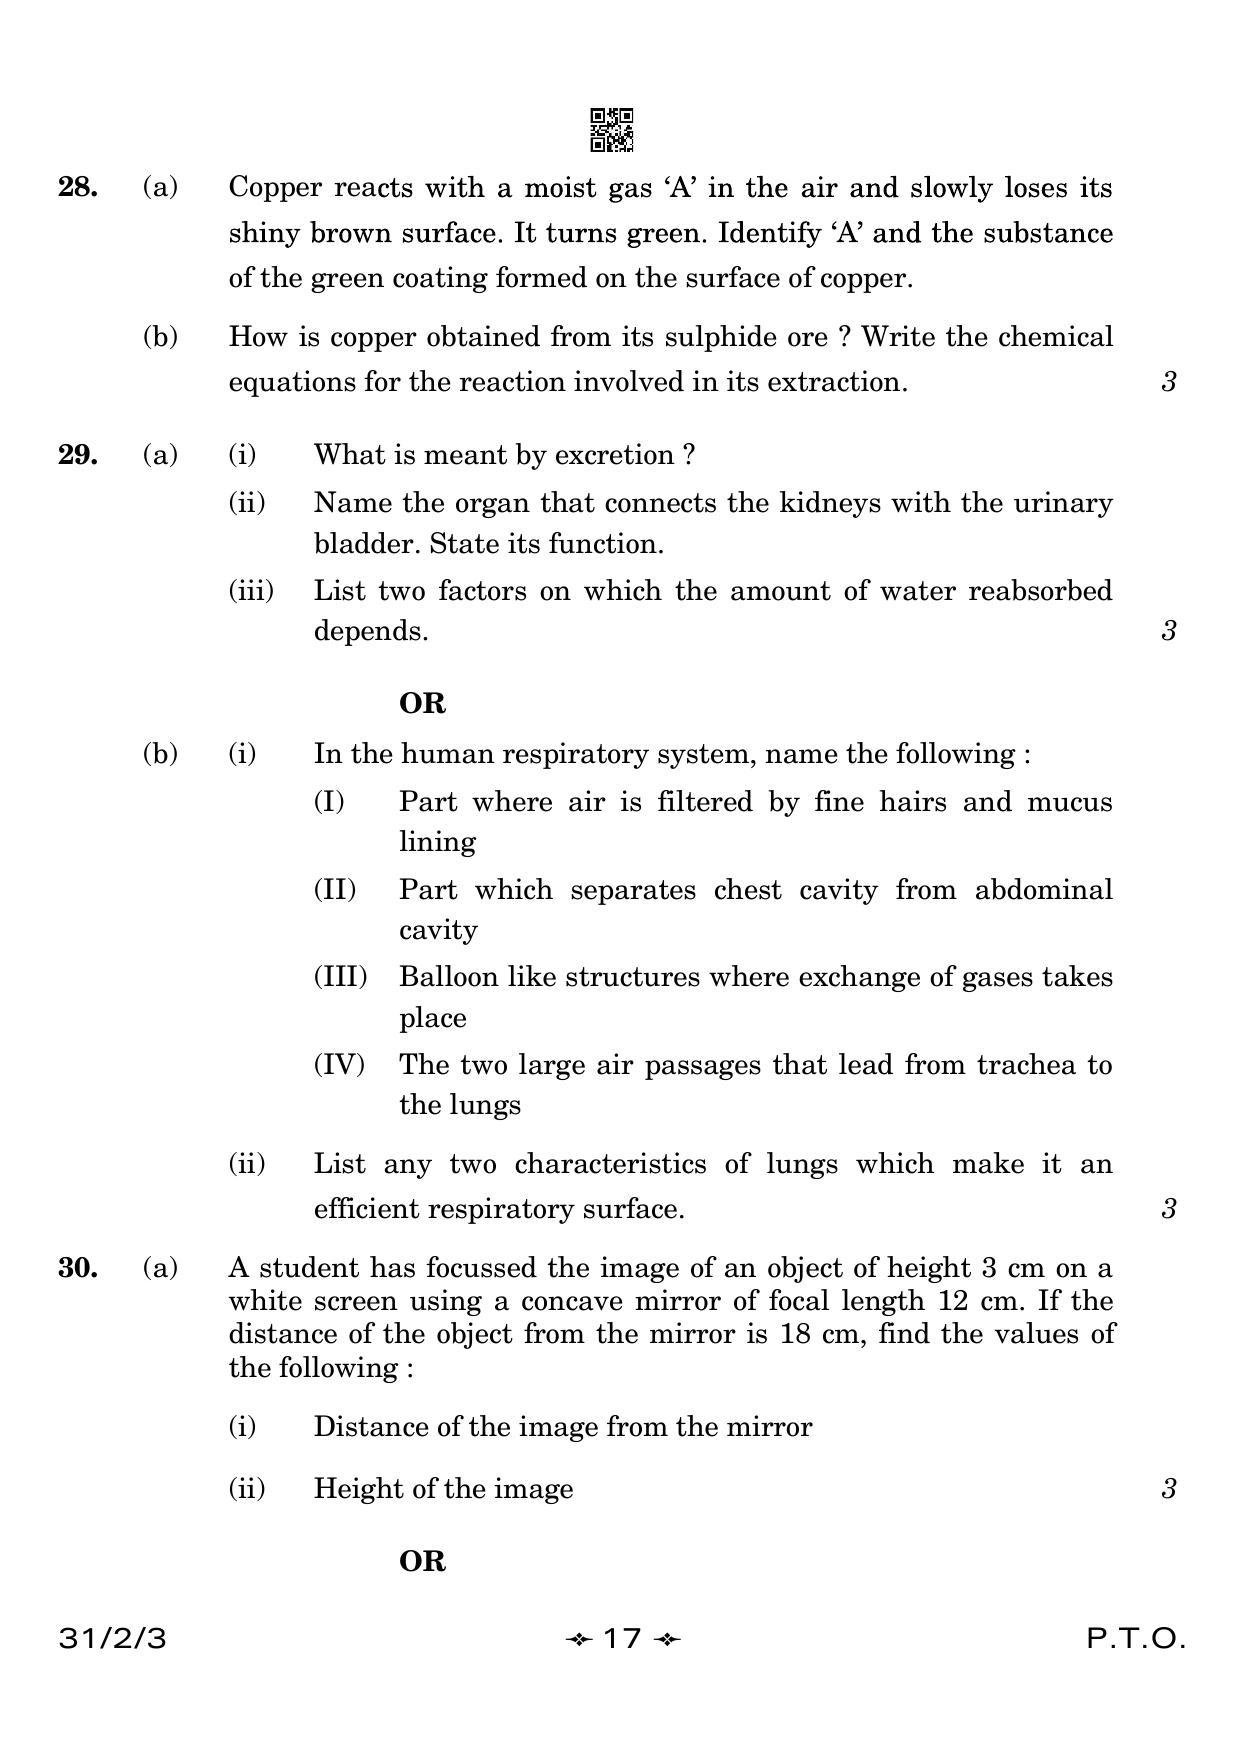 CBSE Class 10 31-2-3 Science 2023 Question Paper - Page 17